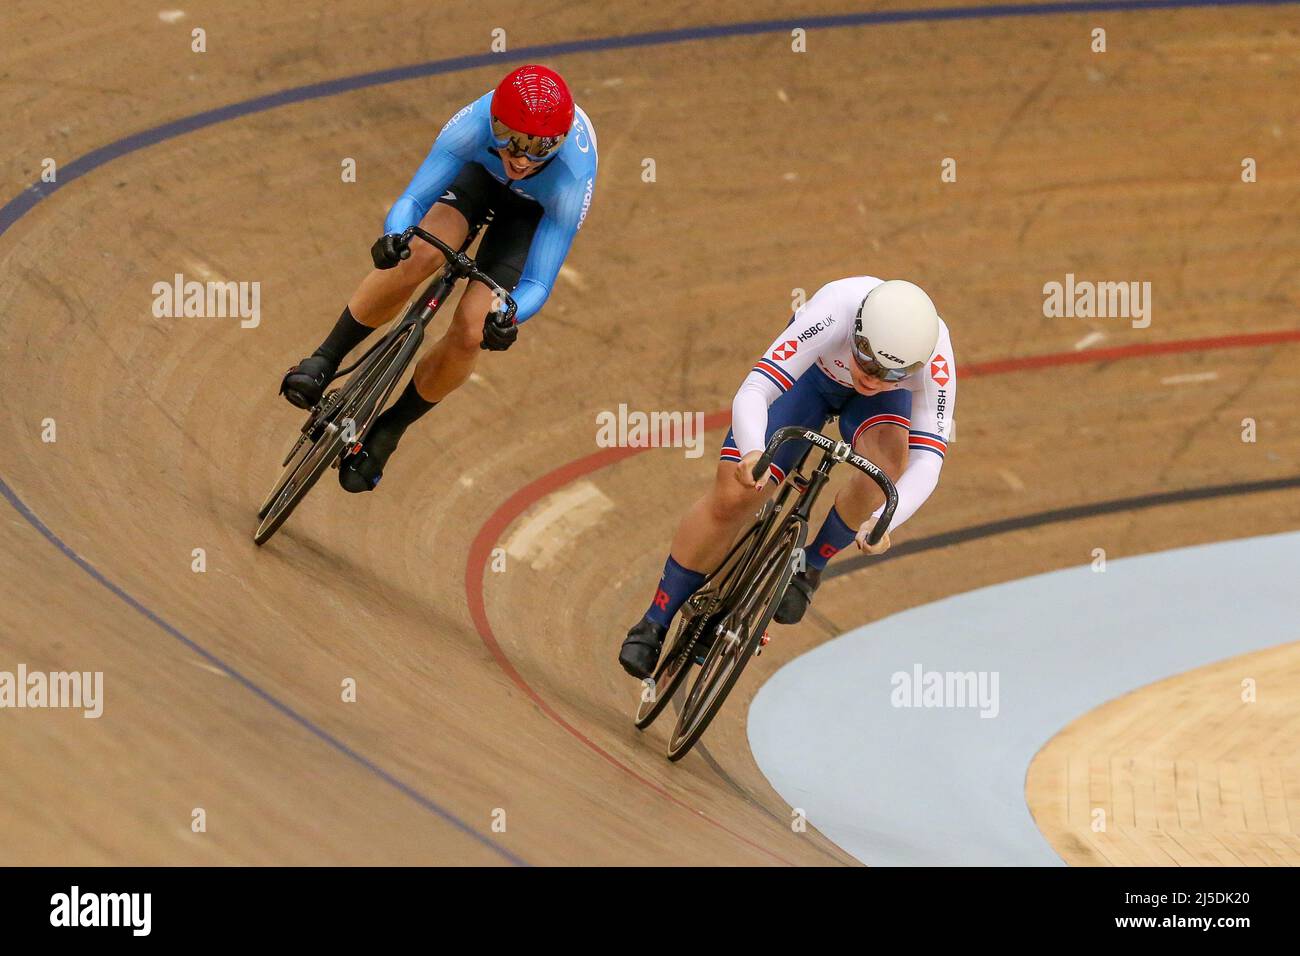 Glasgow, UK. 22nd Apr, 2022. On day two of the UCI Track Nations Cup, Women cyclists from across the world took part in the Women's Sprint qualifying race. Credit: Findlay/Alamy Live News Stock Photo